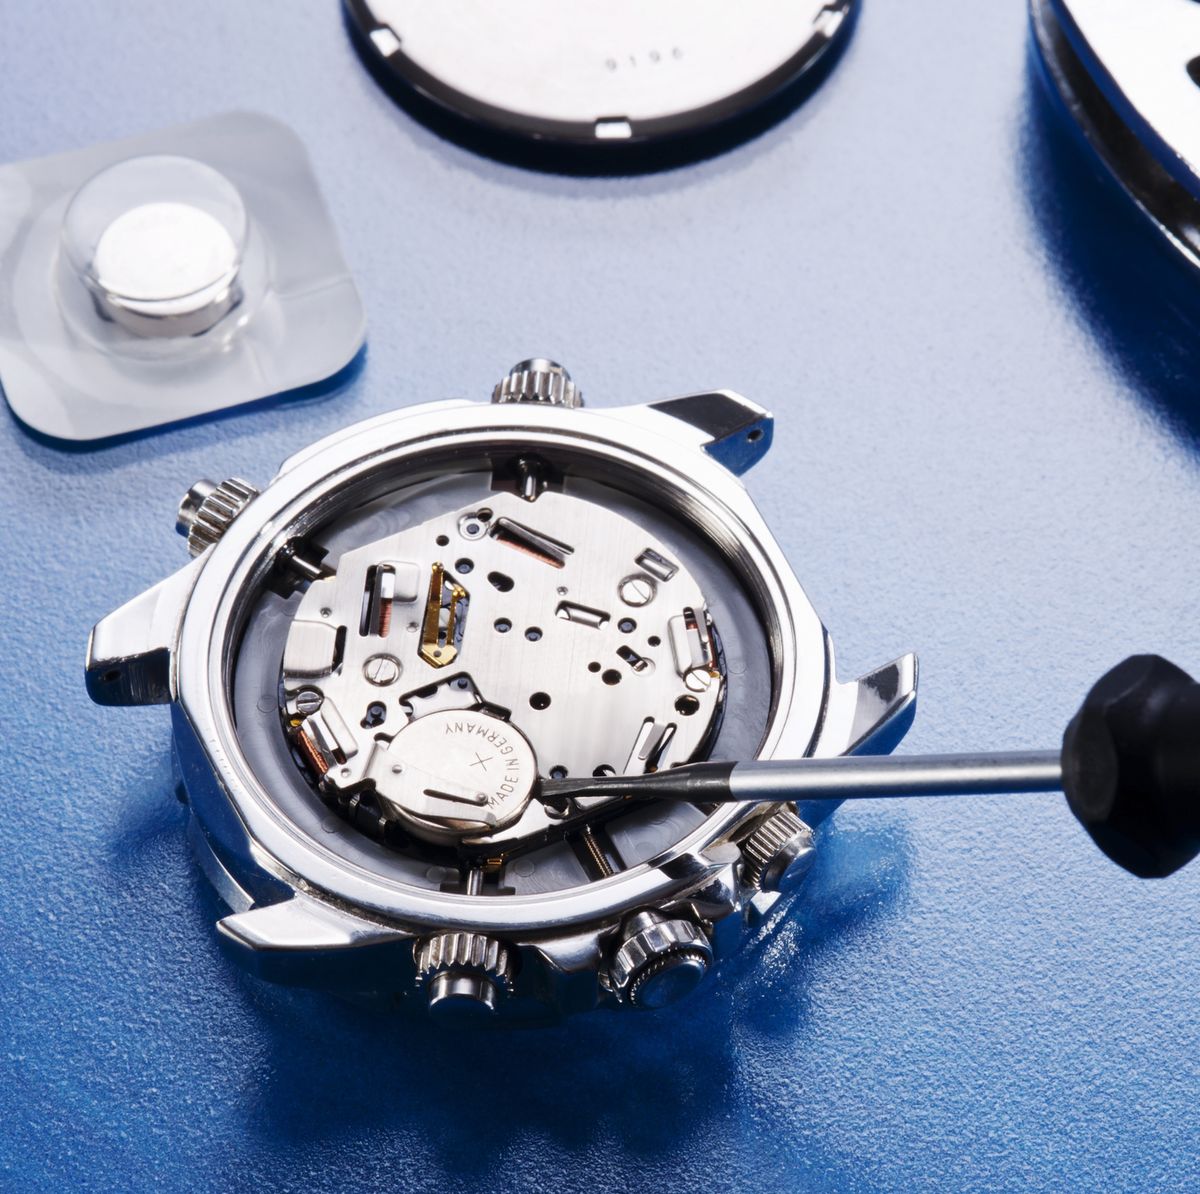 Flere Tranquility mærkelig How to Change a Watch Battery